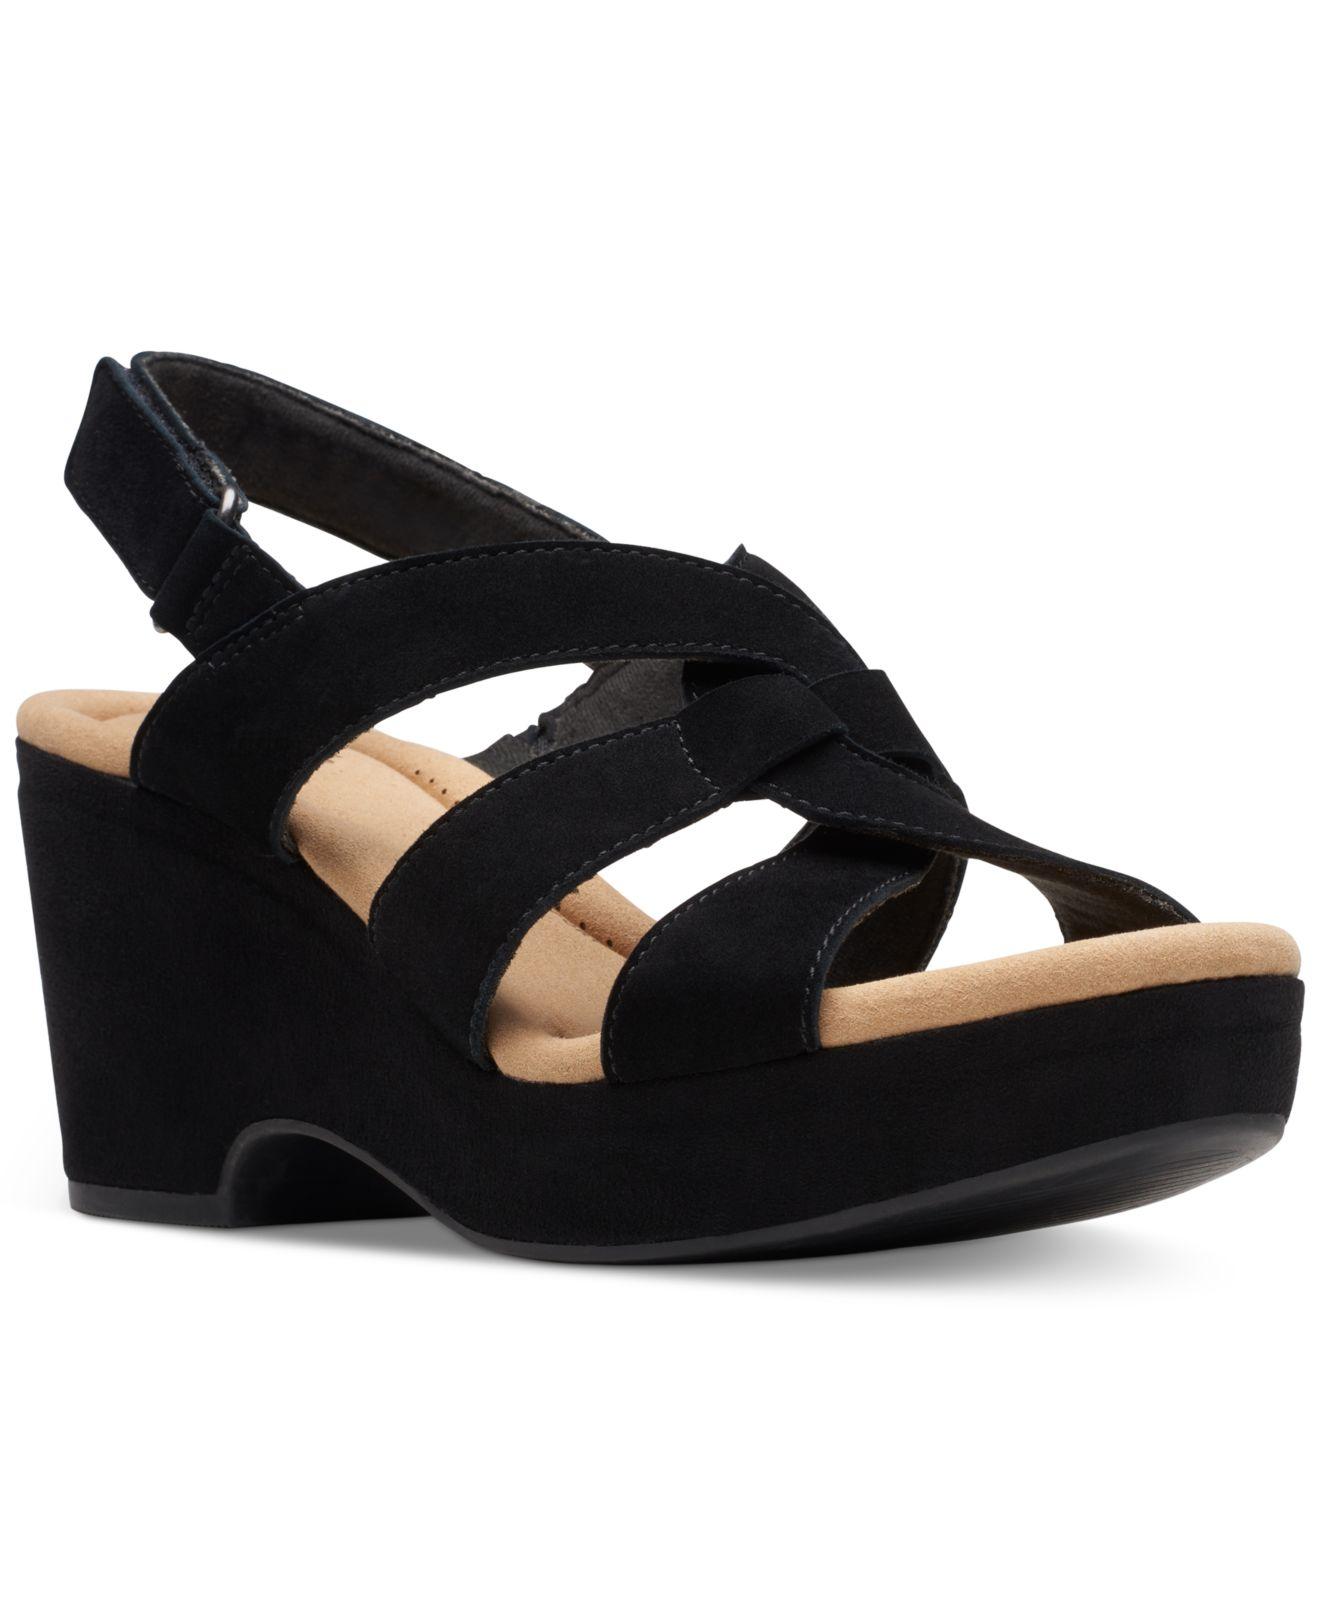 Clarks Collection Giselle Beach Wedge Sandals in Black | Lyst